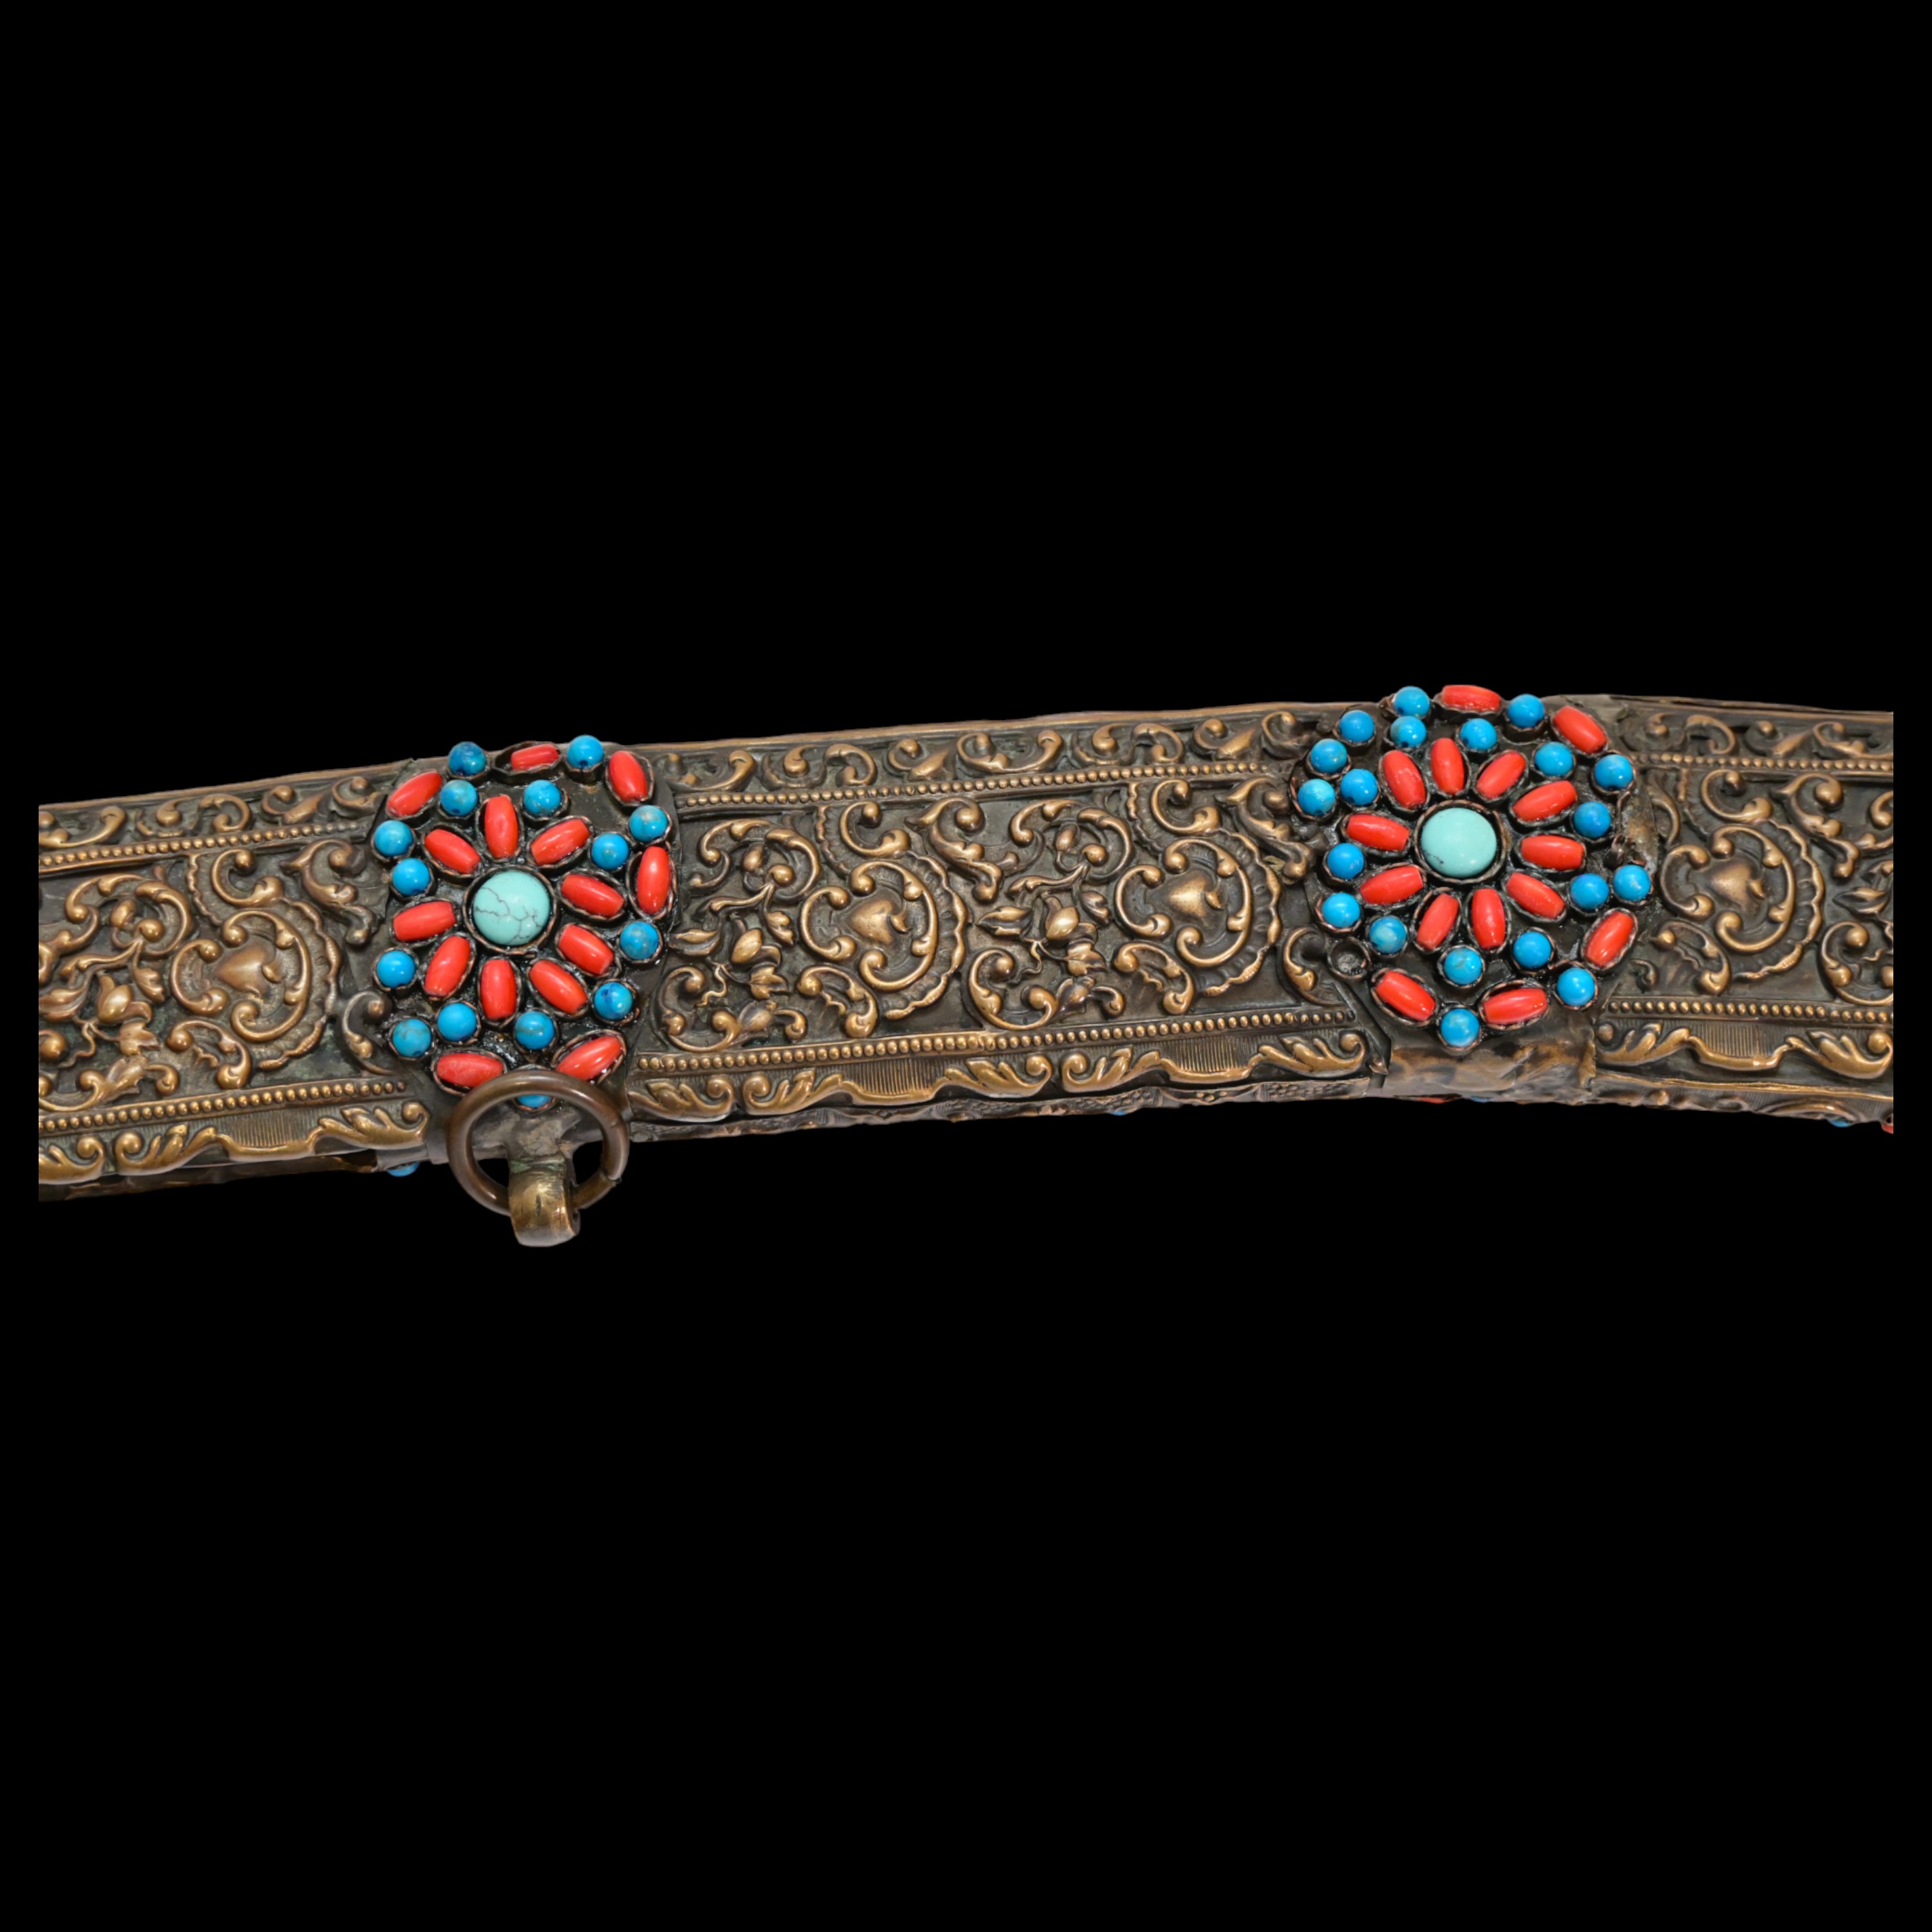 Rare Ottoman sword, Kilij, Pala, decorated with corals and turquoise, Turkey, Trabzon, around 1800. - Image 24 of 31